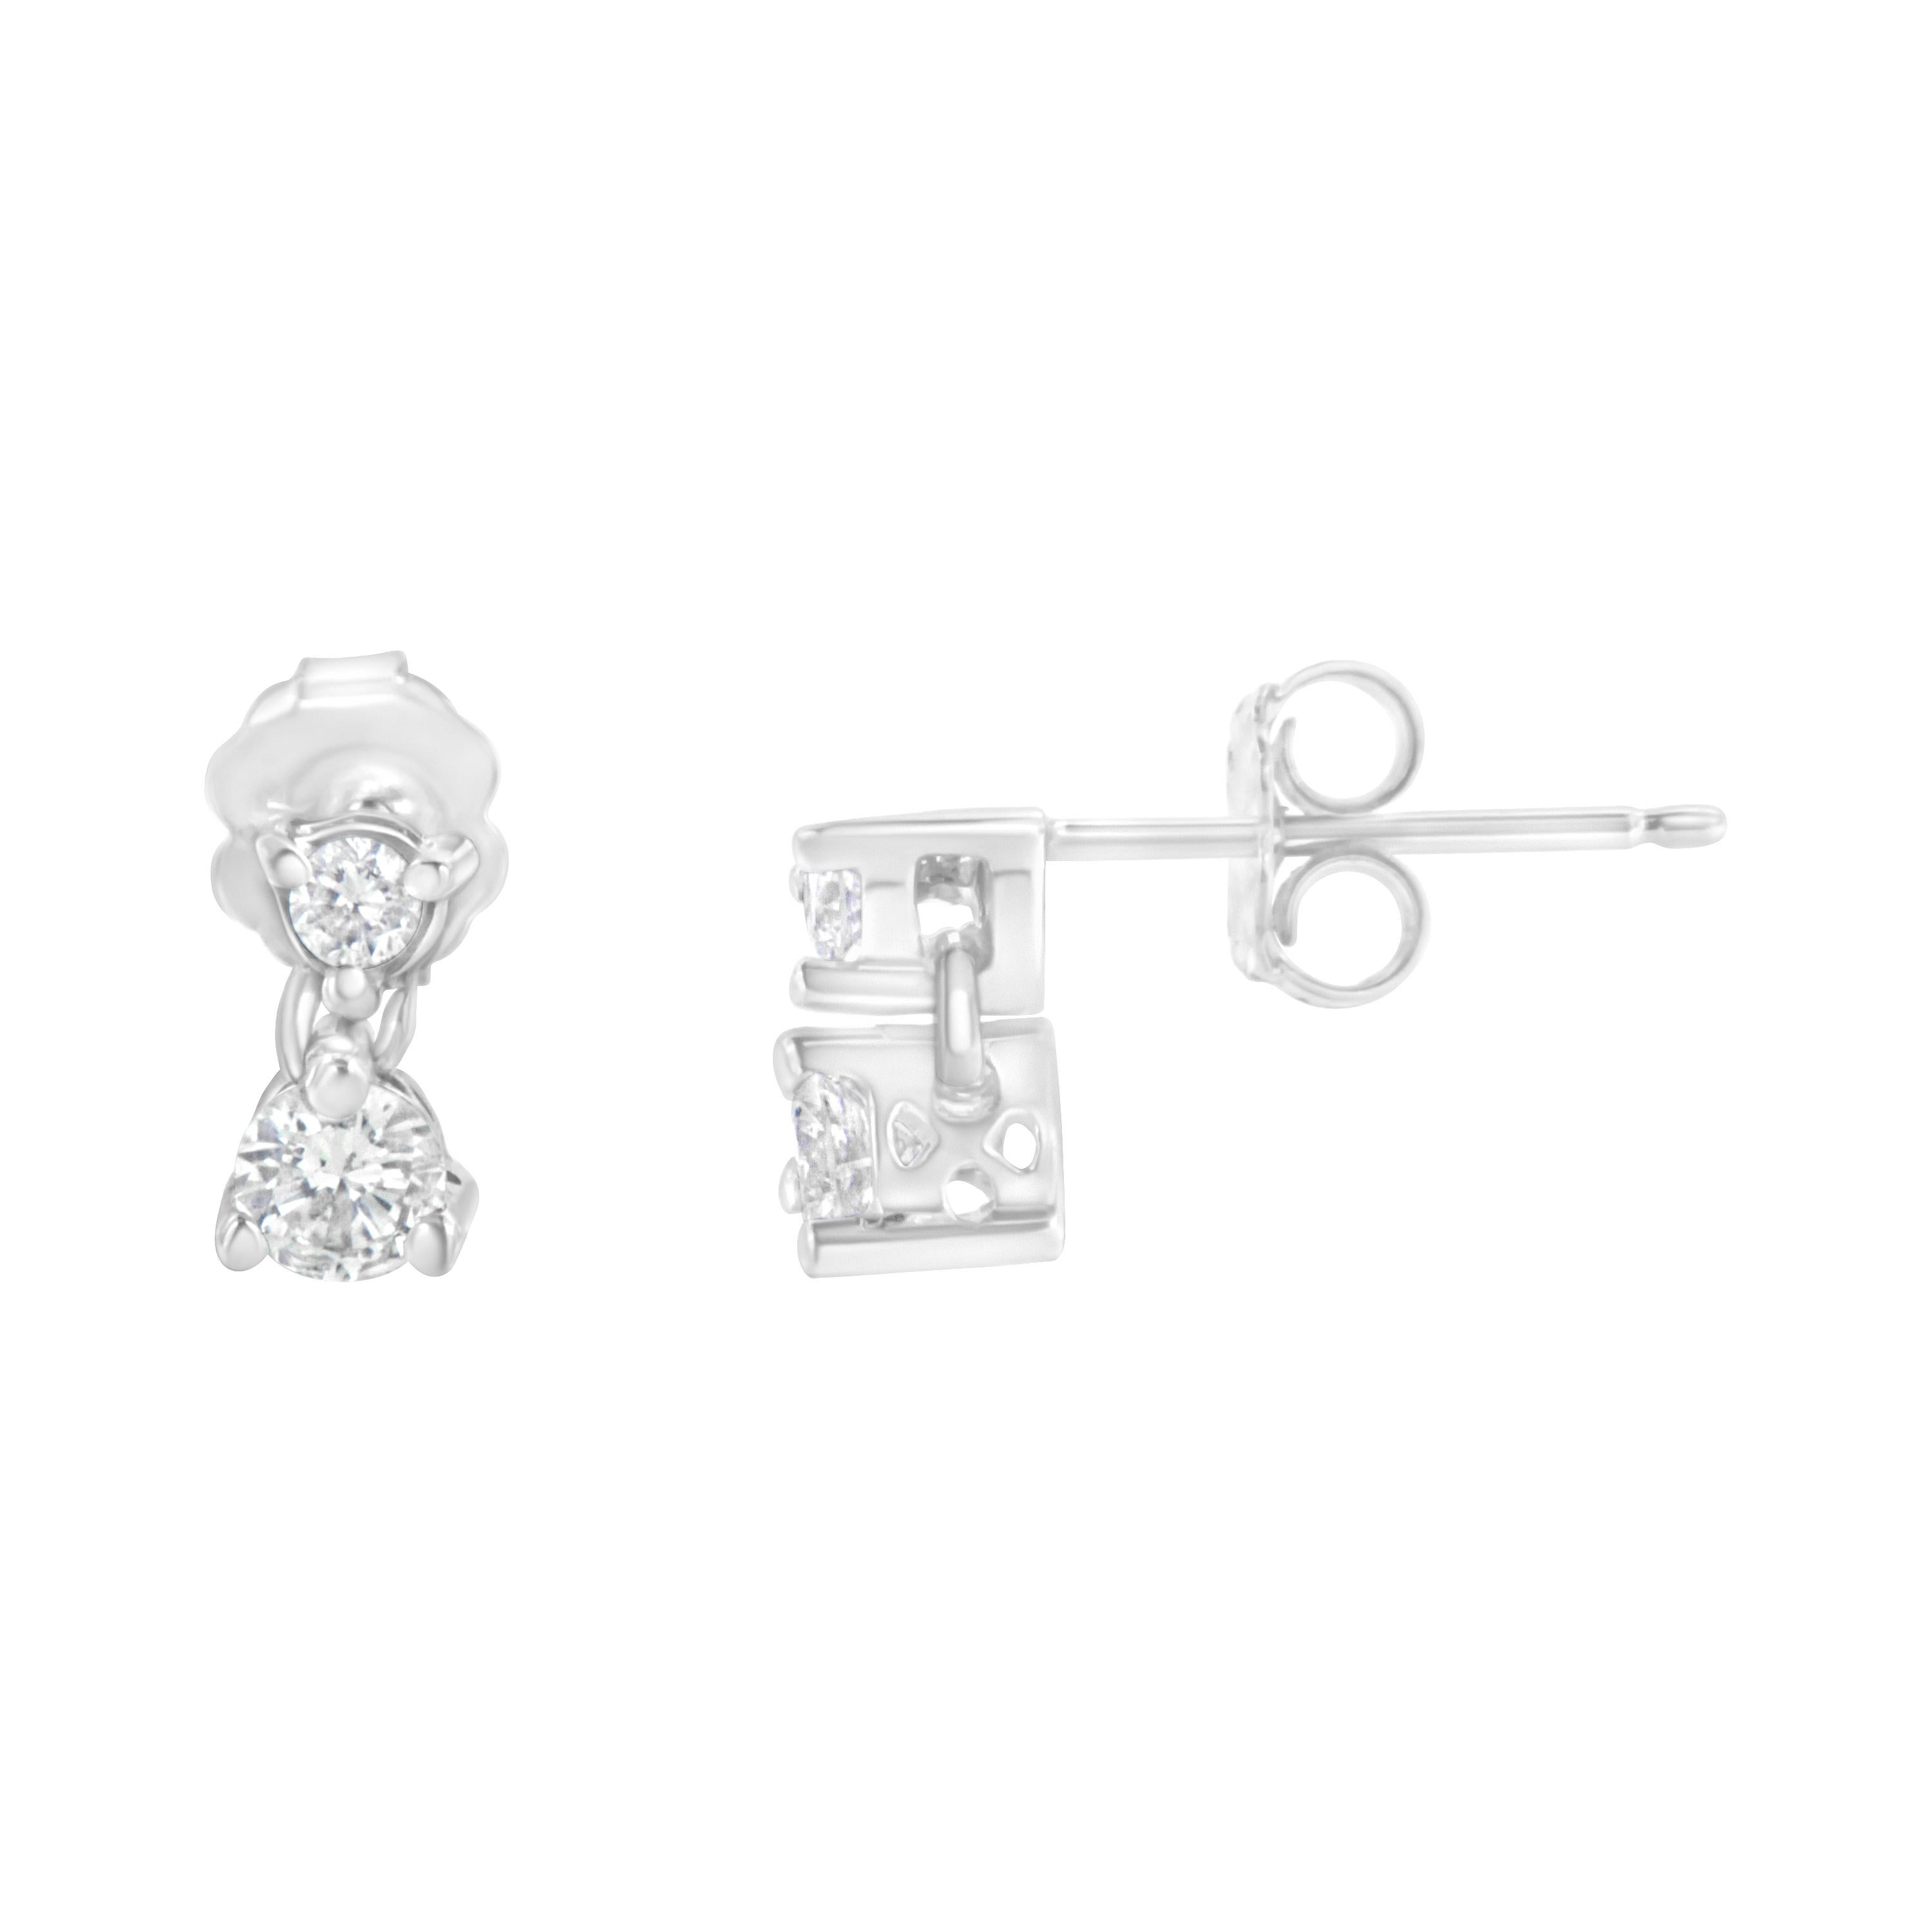 With a simple and elegant design, these 14k white gold dangle stud earrings will enhance any ensemble. 1/2 carat TDW of round cut diamonds glimmer in these adorable earrings that finish off with a secure push back secure fit. These natural diamonds